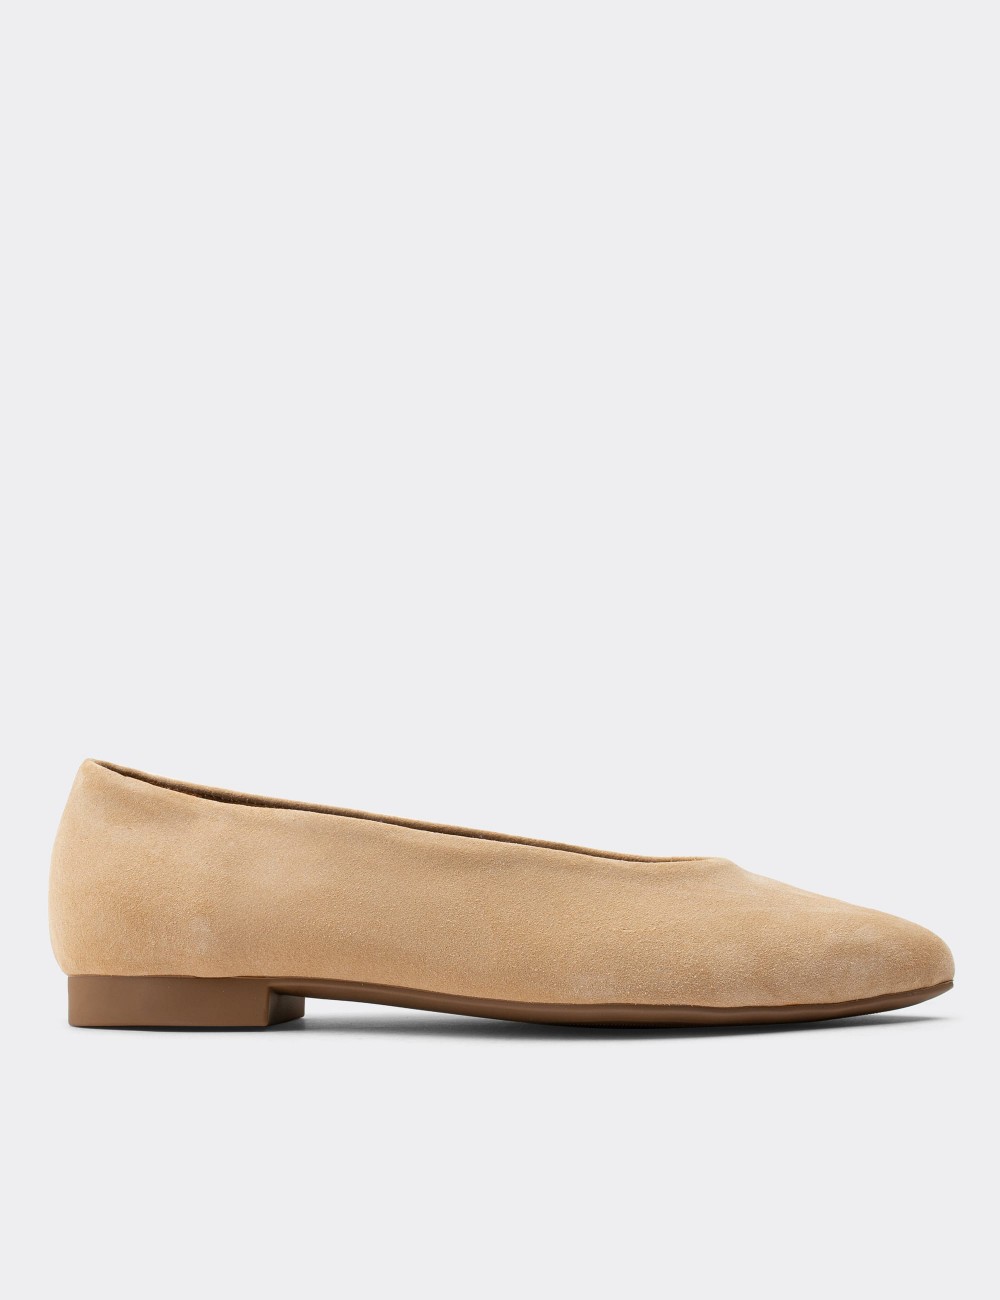 Beige Suede Leather Loafers - 01896ZBEJC01